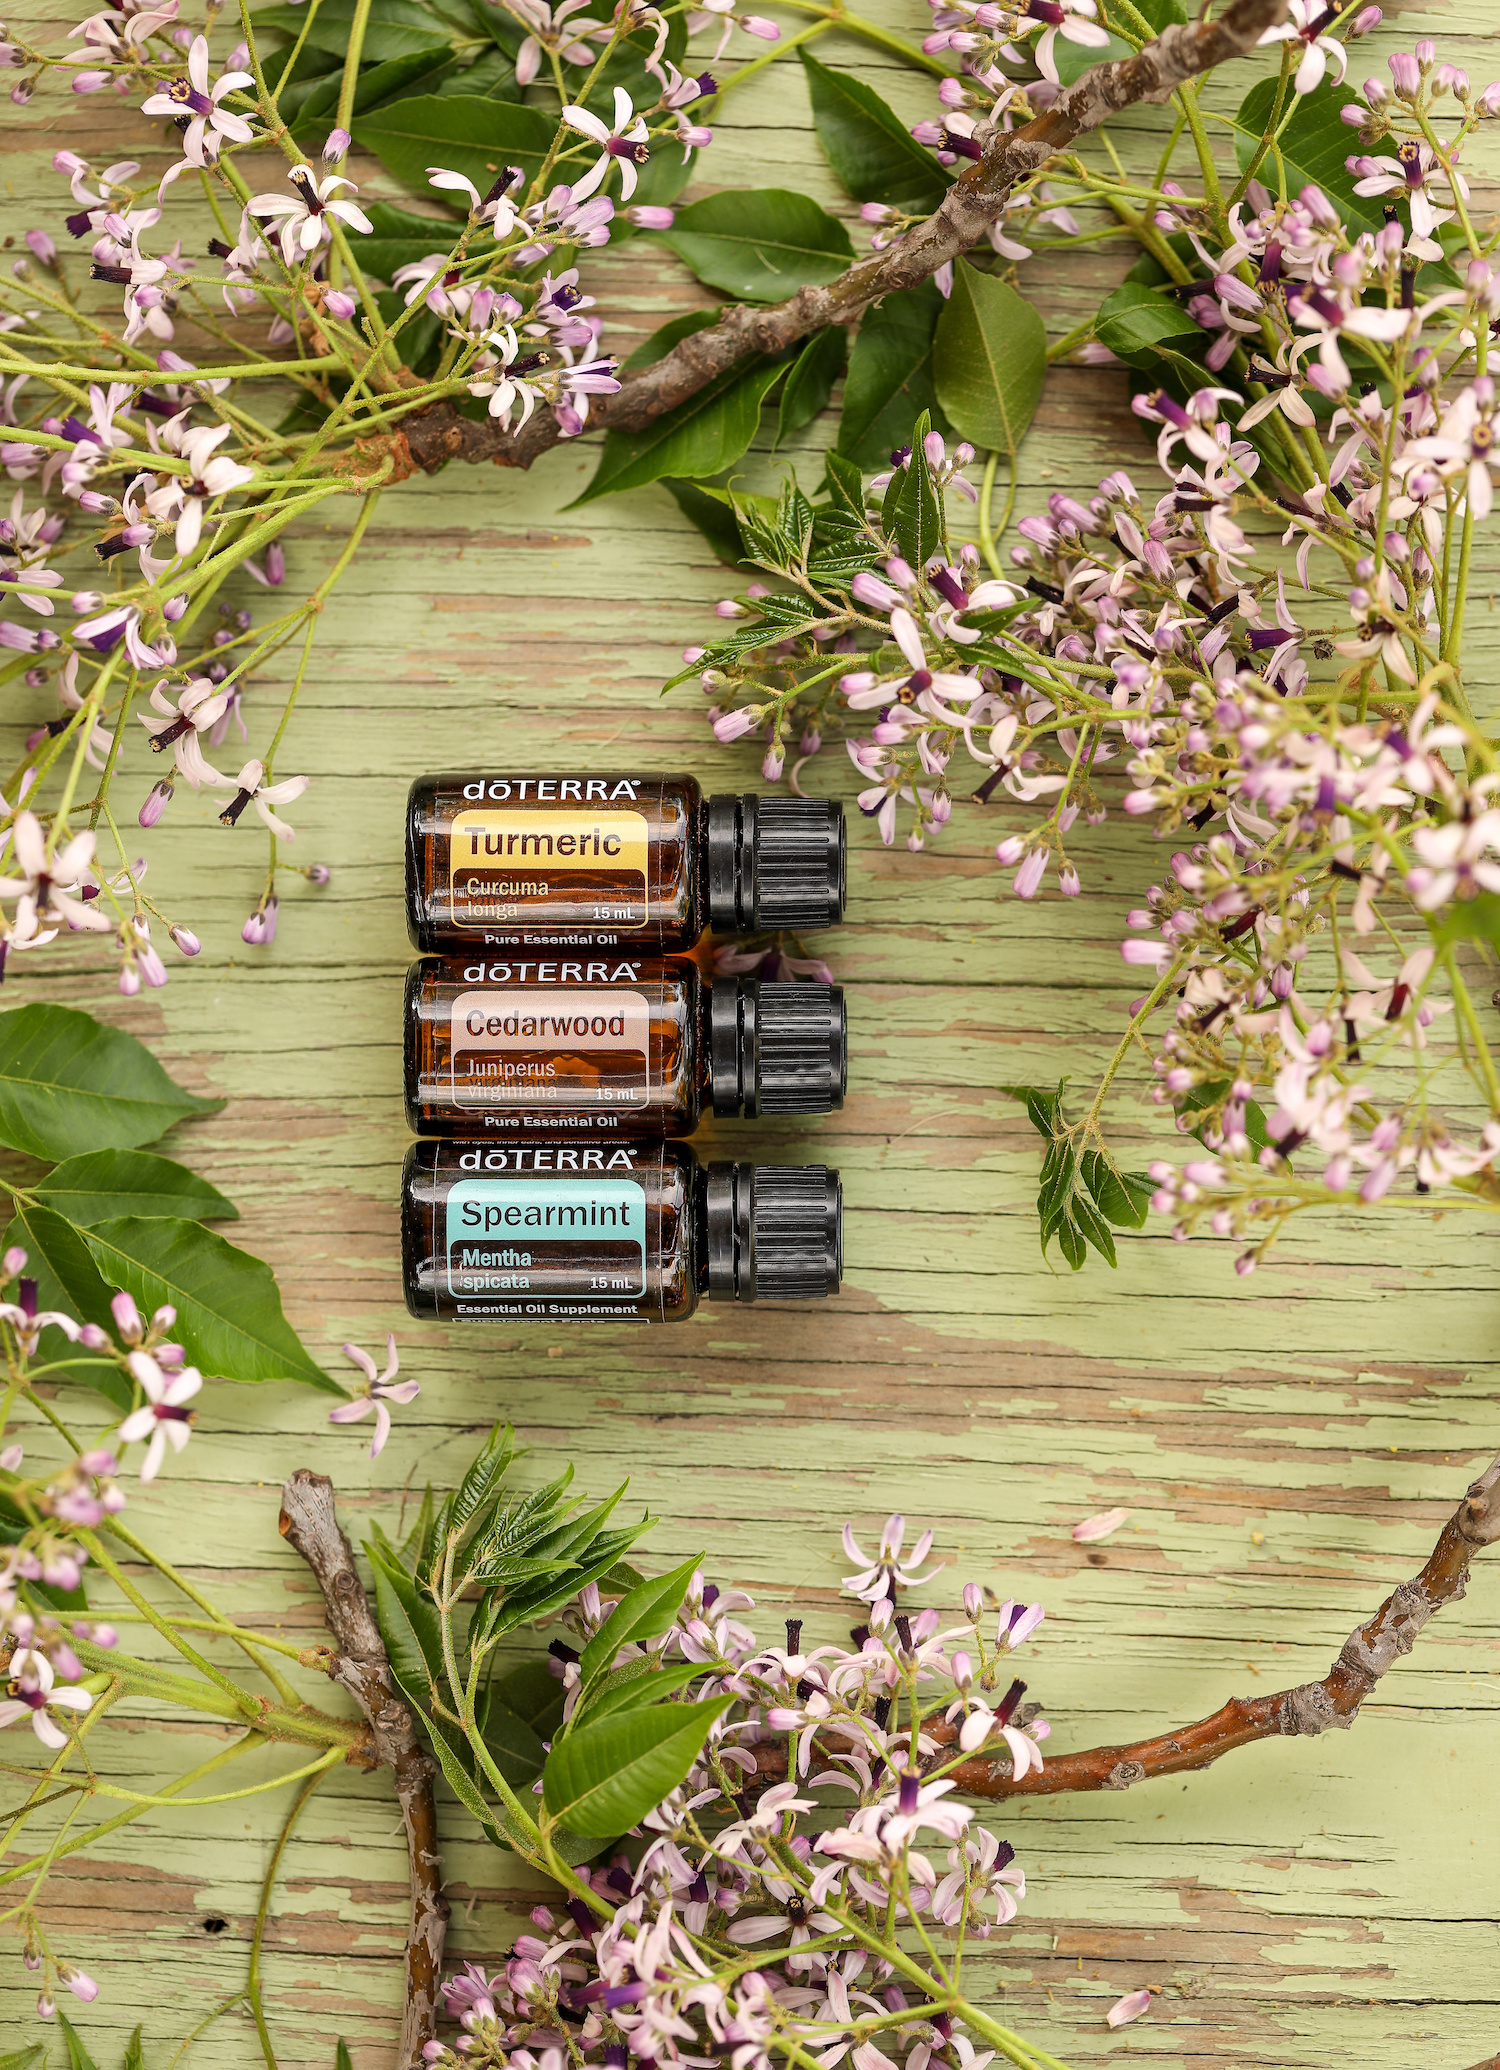 Mudgee, New South Wales / Australia - October 19 2020 - Illustrative editorial flat lay image of doterra essential oils surrounded by purple flowers on wooden surface, tumeric, cedarwood, spearmint.